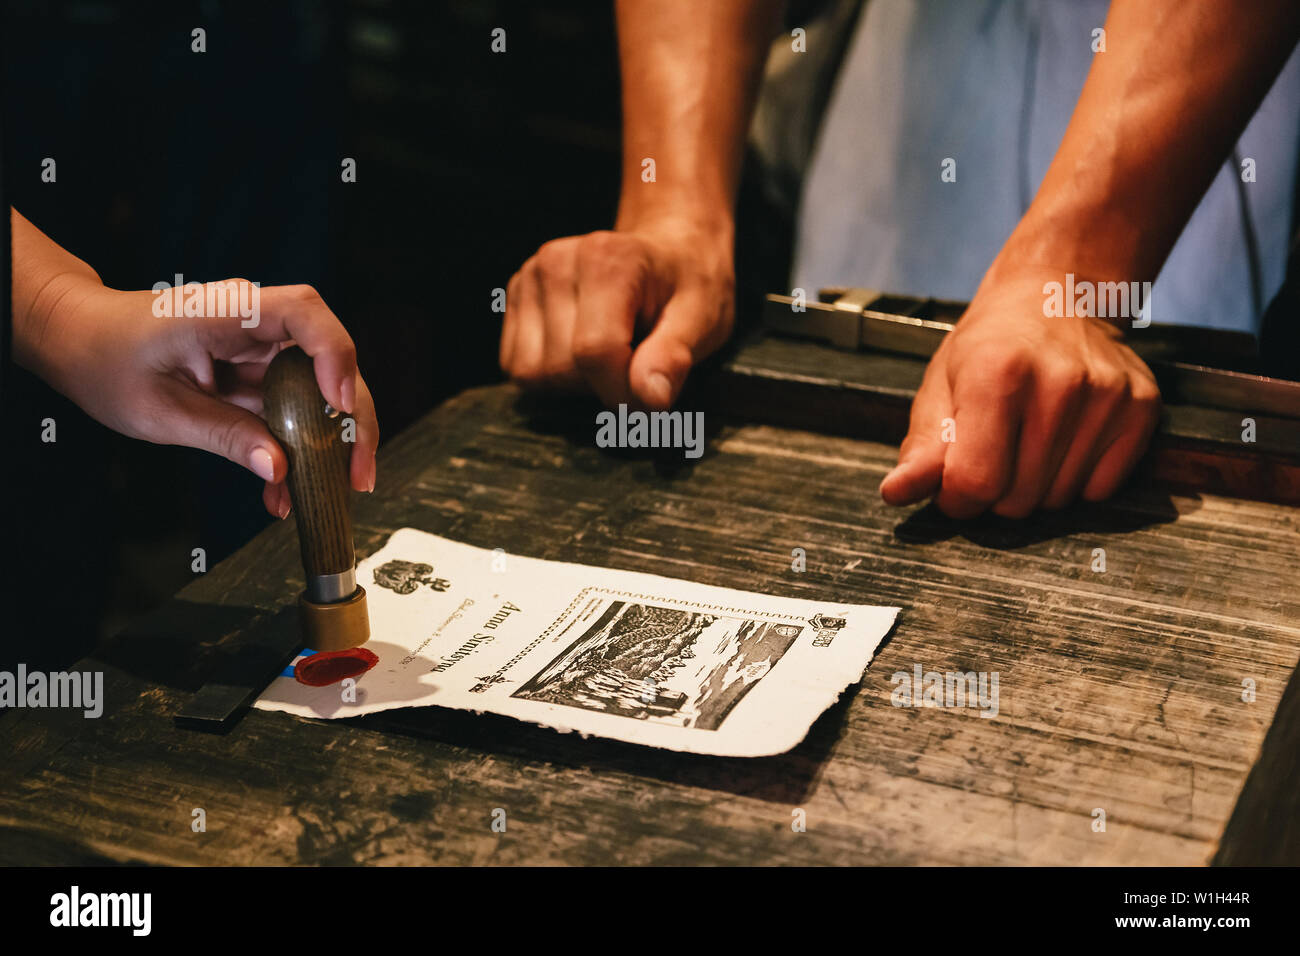 Bled, Slovenia - September, 8 2018: Close up of woman's hands making a souvenir by herself, making a personal stamp of melted red sealing wax at old-s Stock Photo